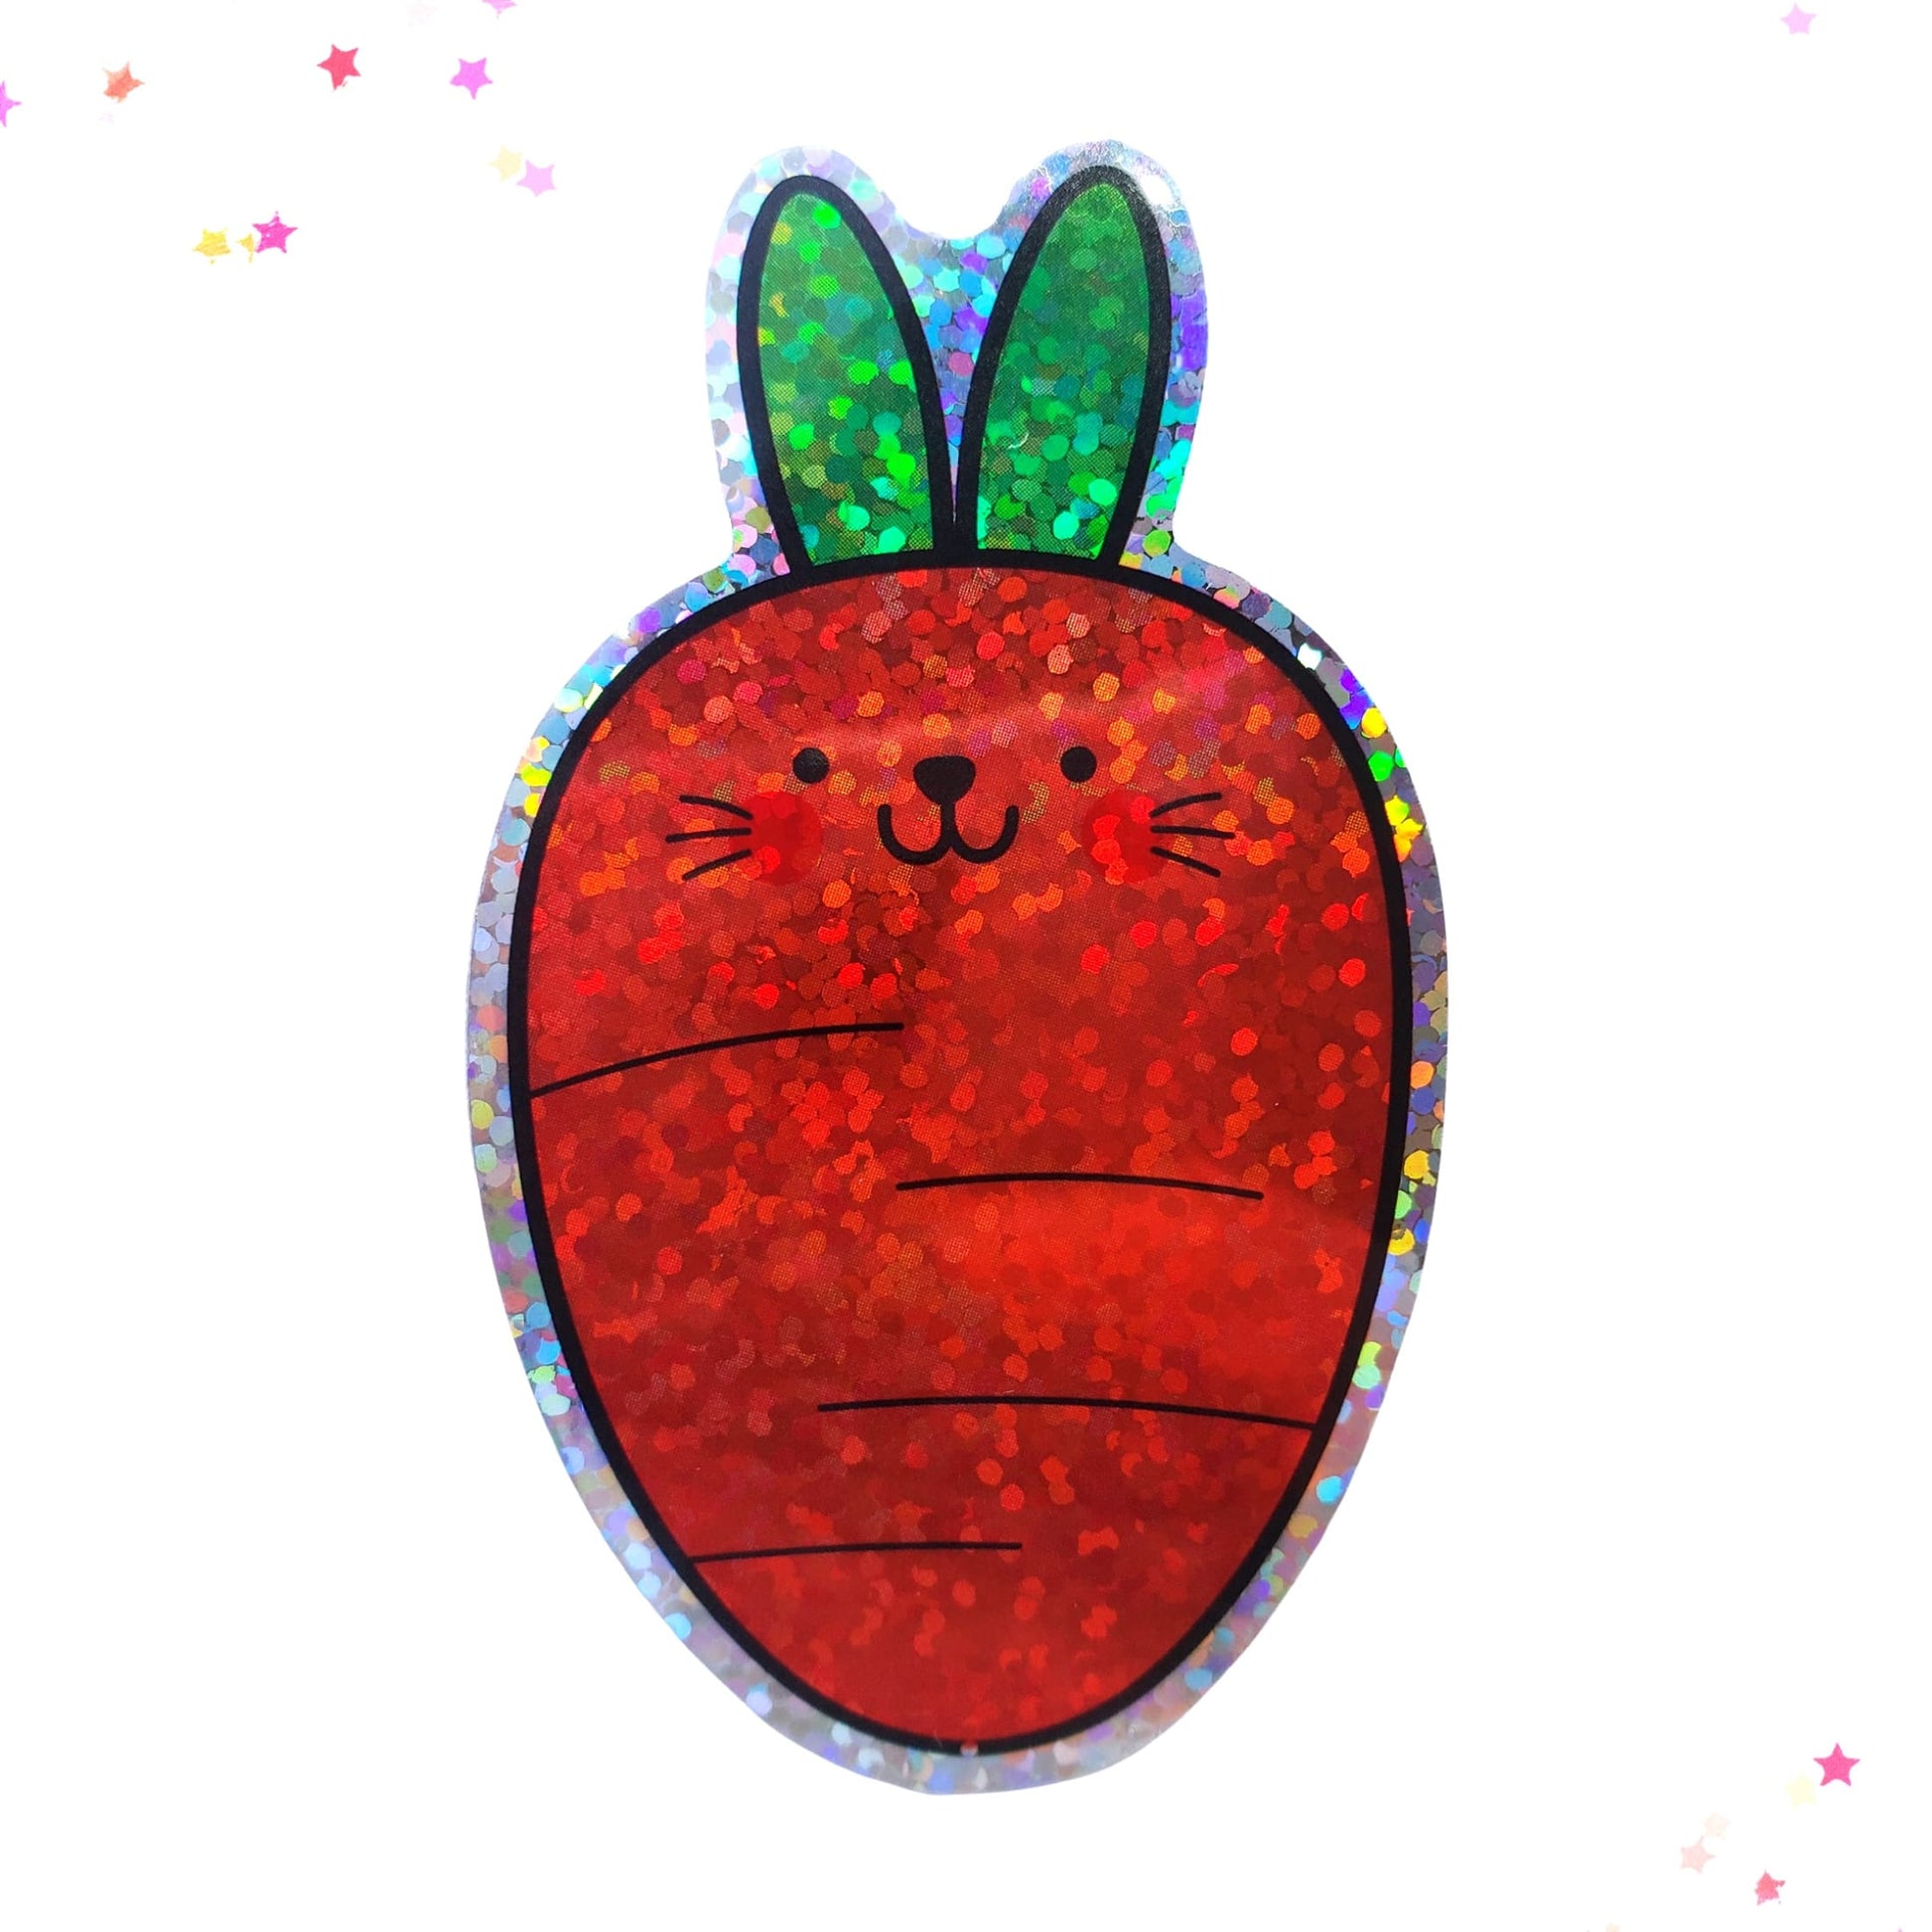 Premium Sticker - Sparkly Holographic Glitter Kawaii Carrot from Confetti Kitty, Only 2.00